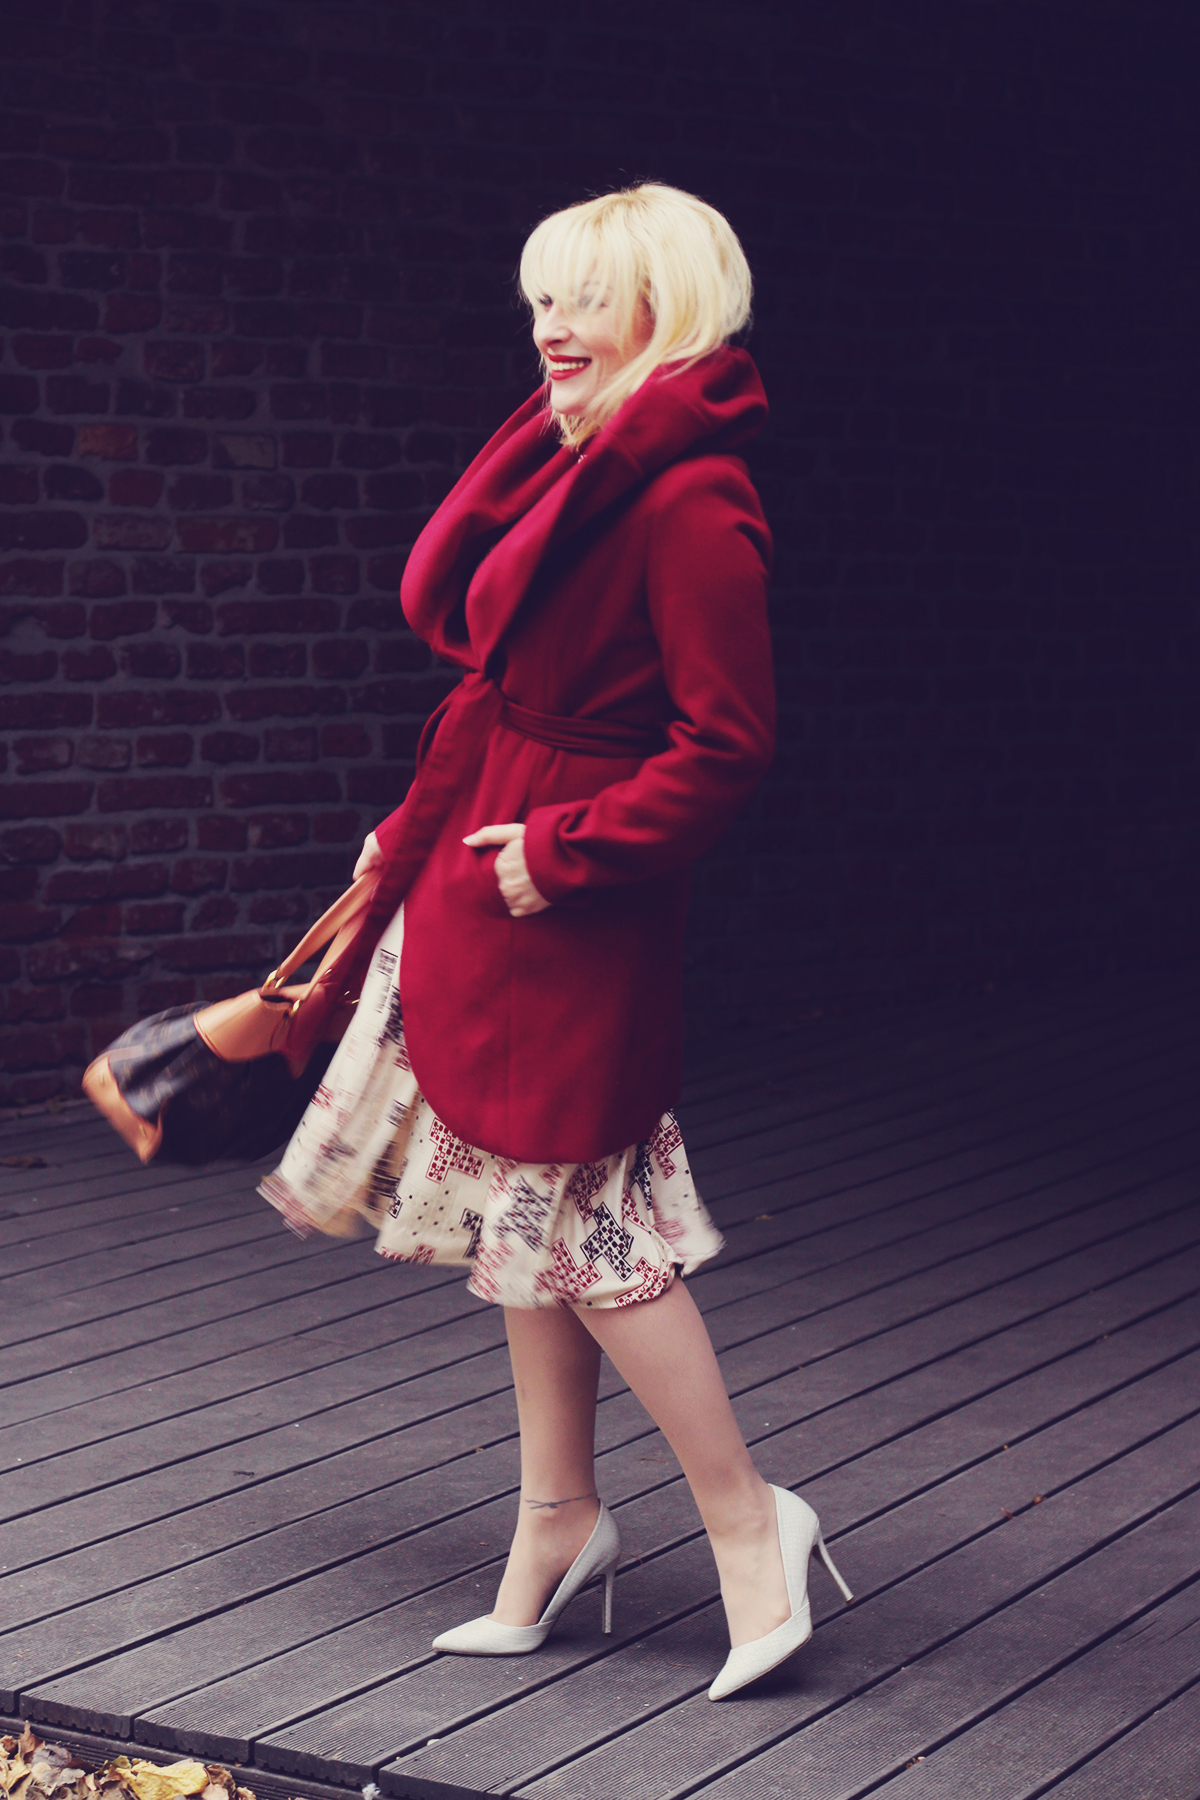 winter fashion, christmas party look, louis vuitton bag, red coat, pattern dress, white heels, red lipstick